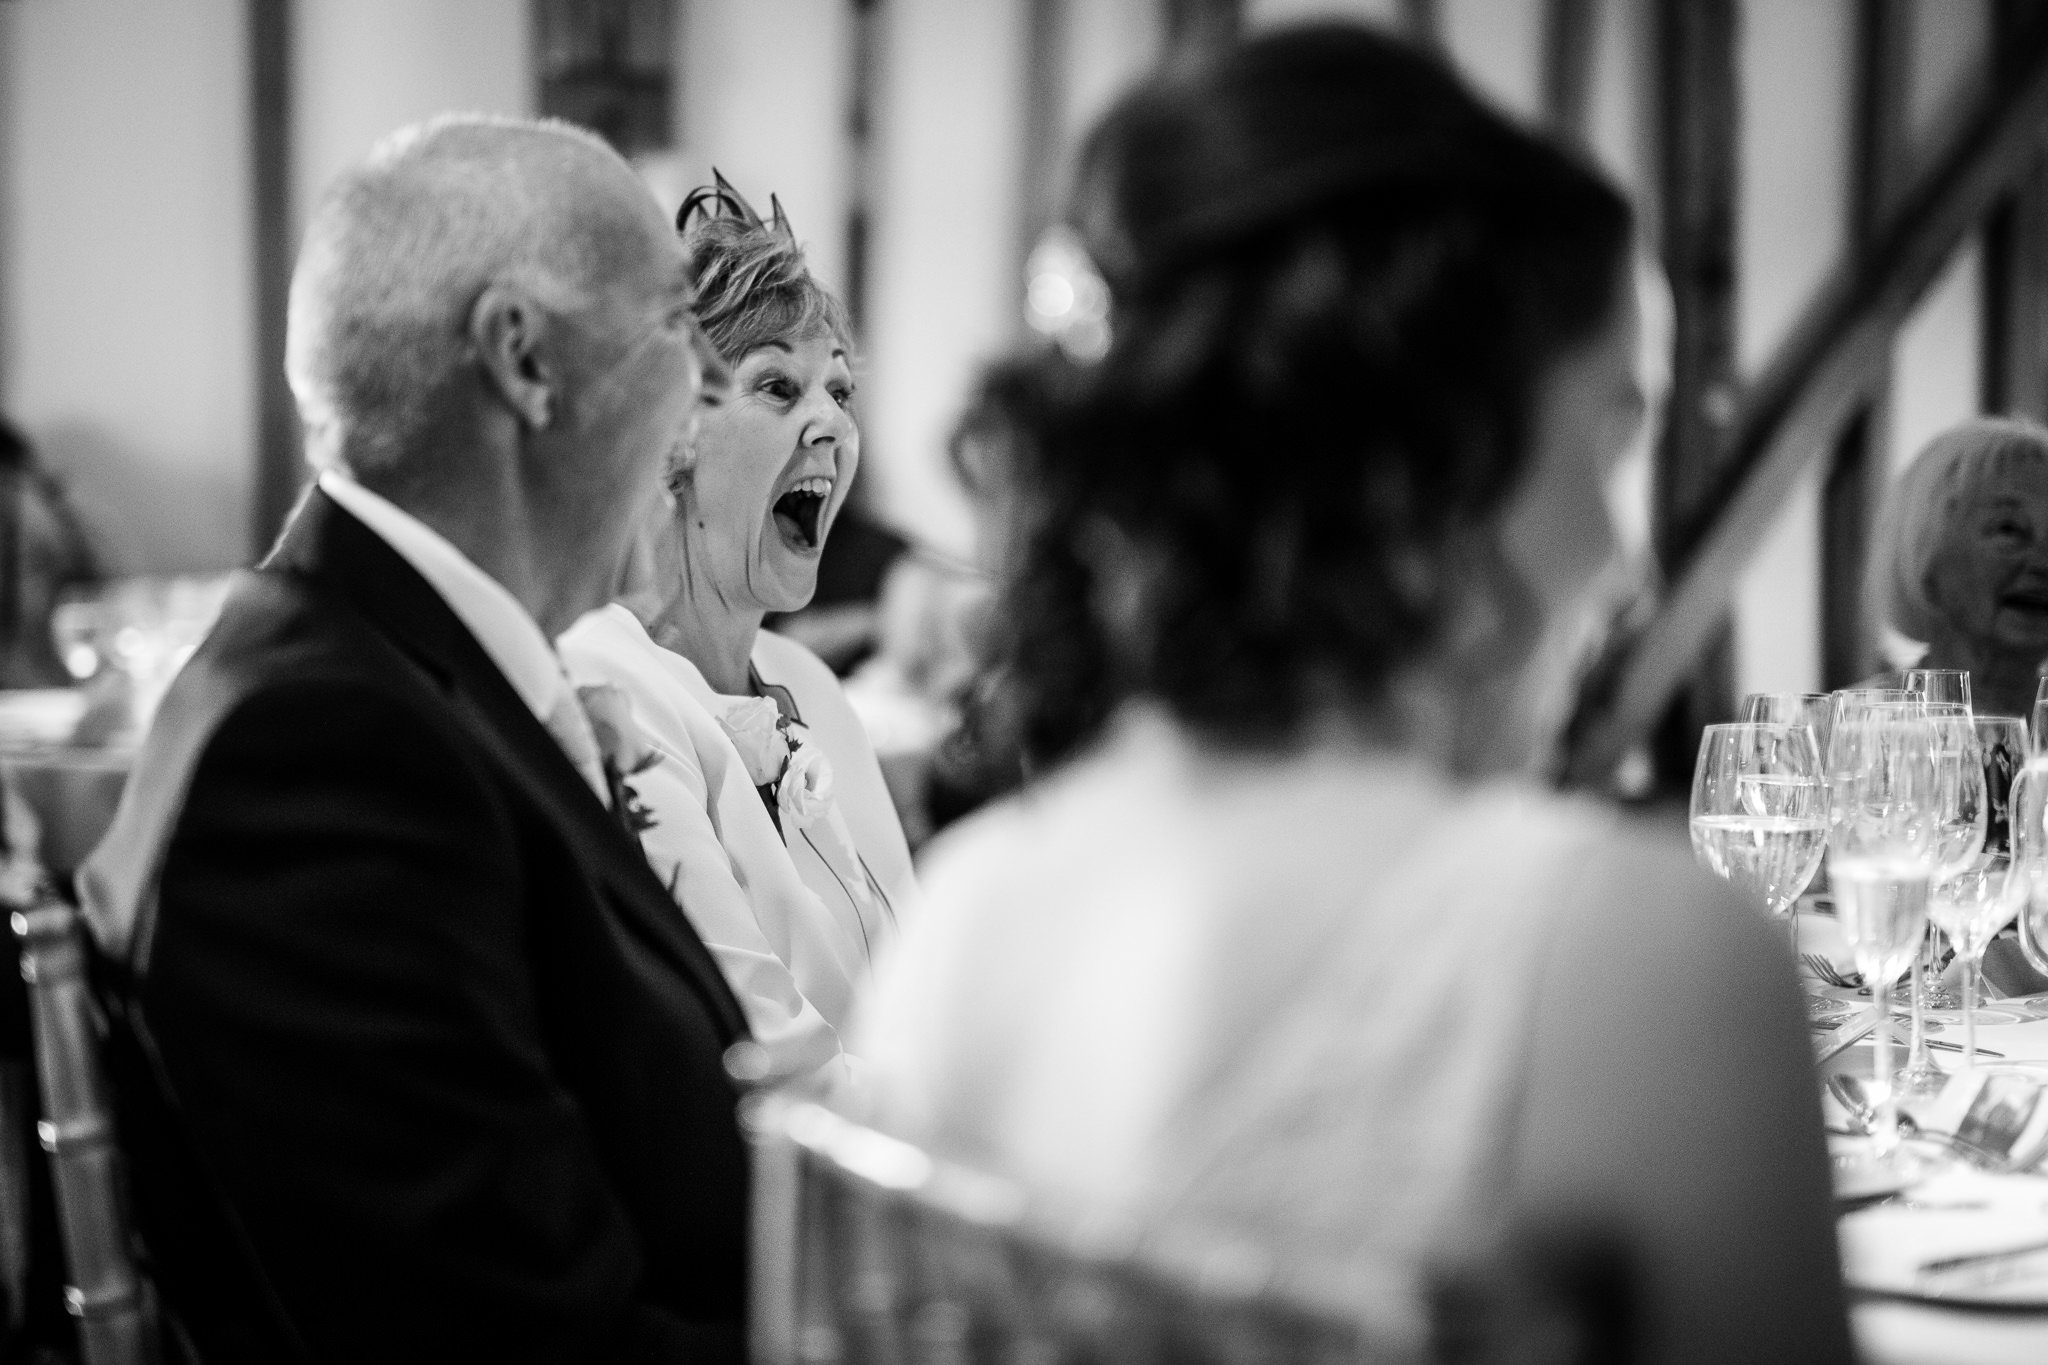  A surprised reaction during the speeches of a wedding guest 